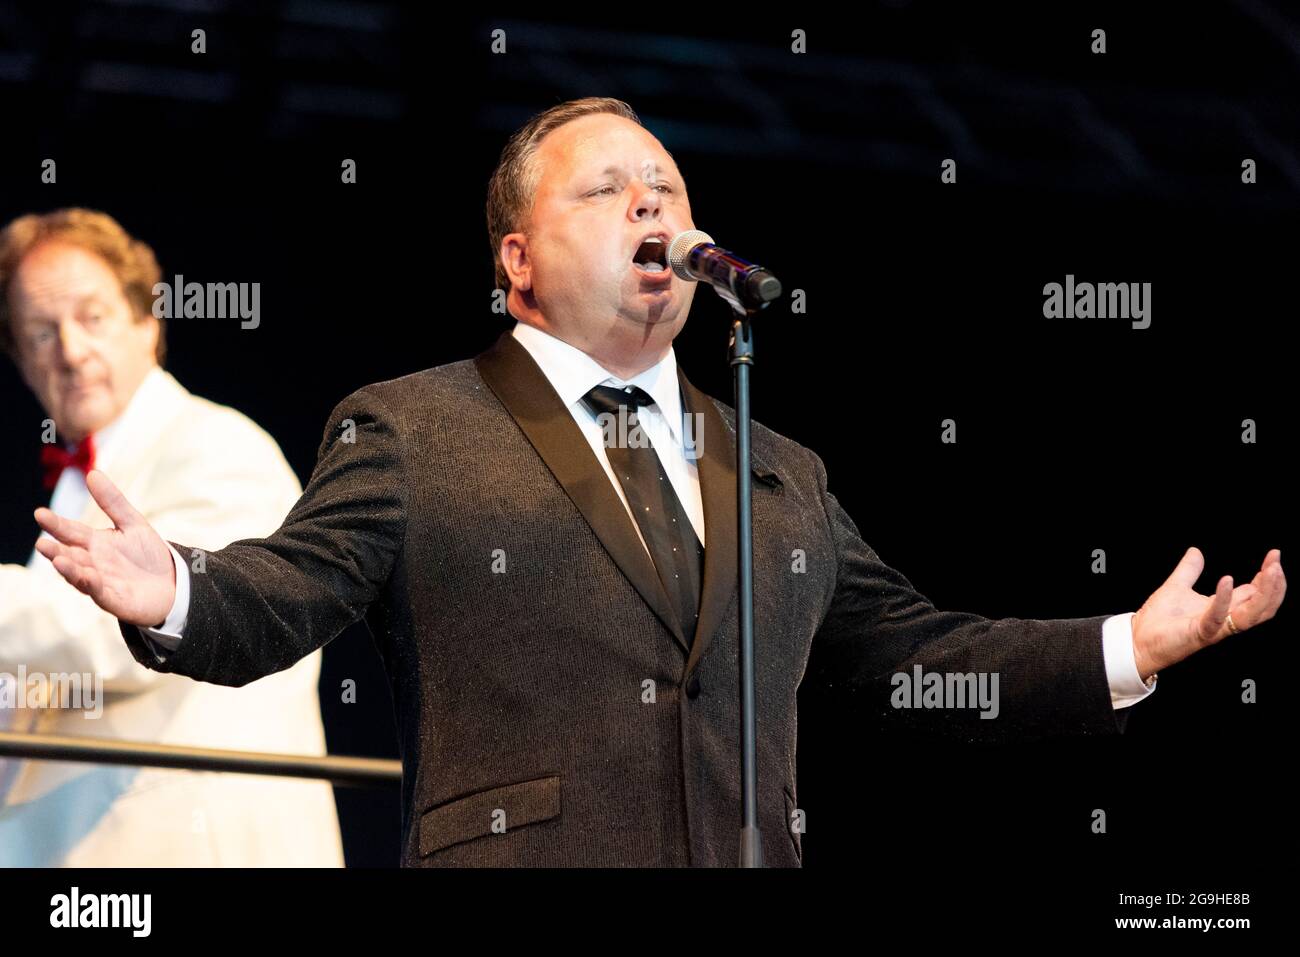 Paul Potts performing on stage in Maldon, Essex, UK. Welsh male operatic tenor singer, singing with the London Concert Orchestra after COVID lockdown Stock Photo